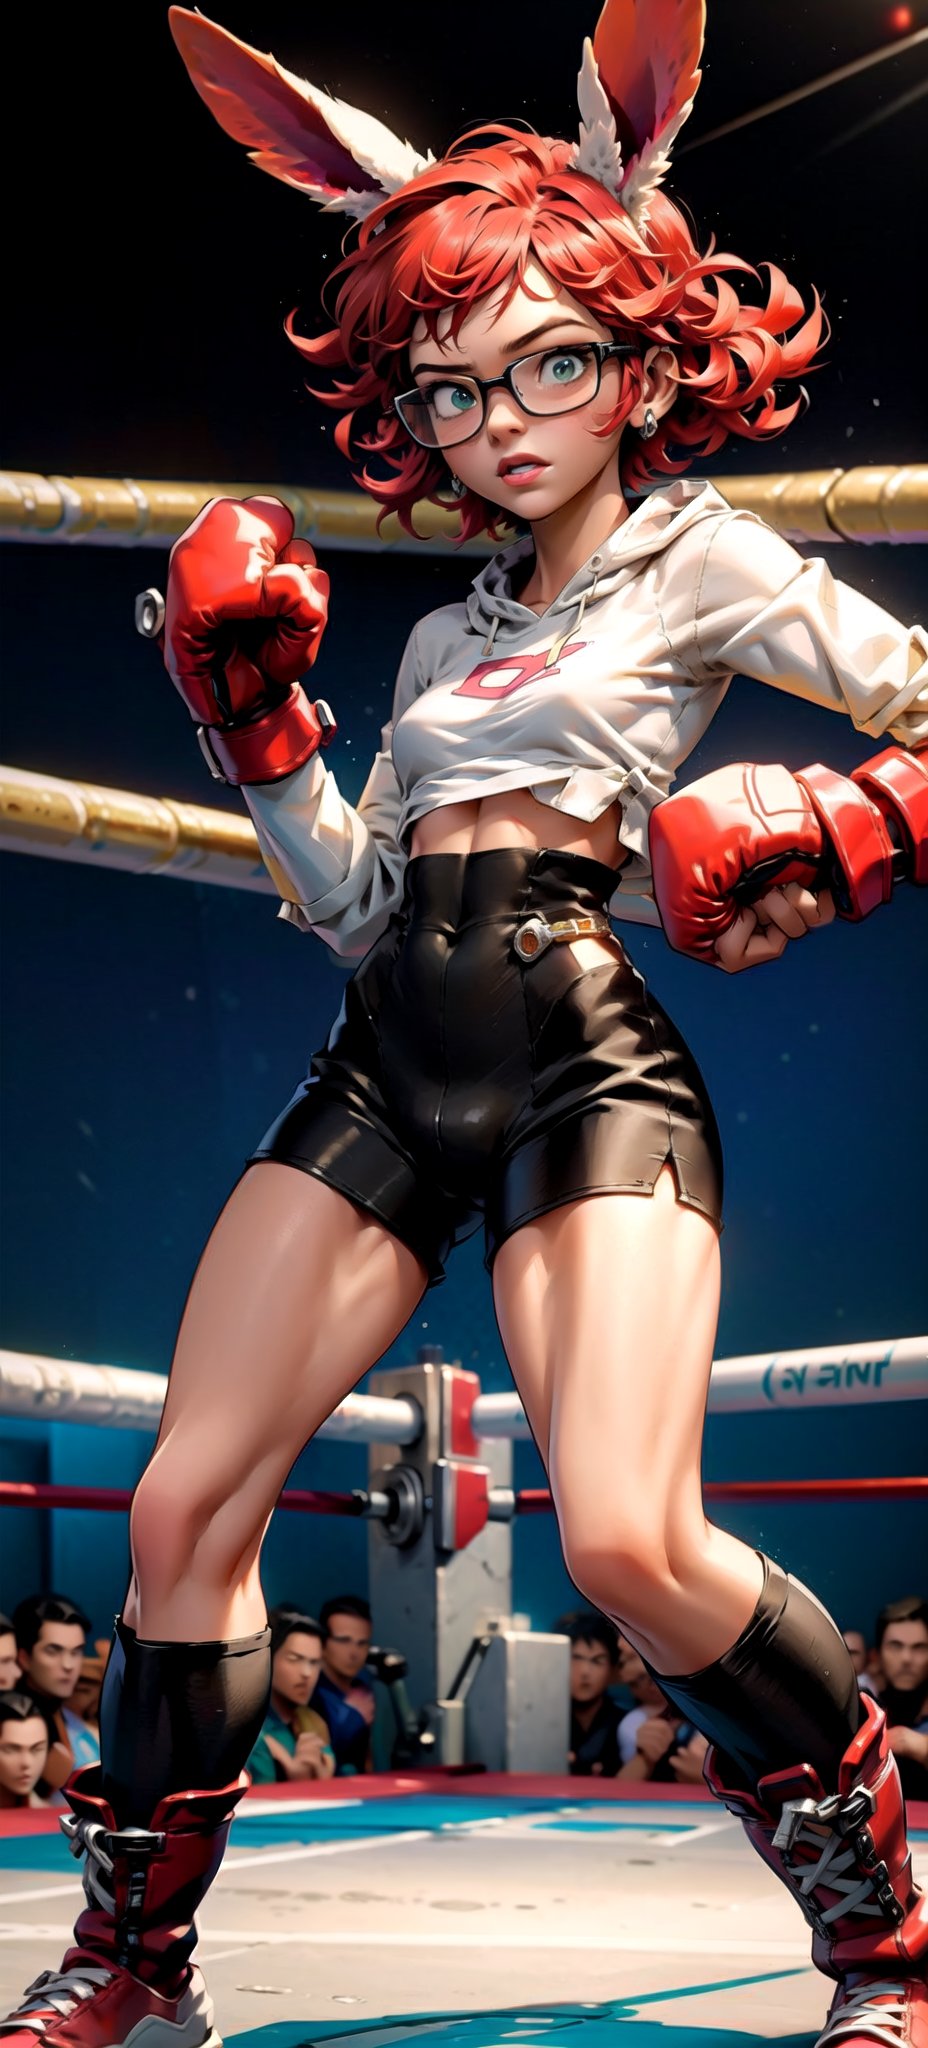 2.5D, 18 years old very beautiful boxer bunny girl, short red hair, bunny ears
, wear thick-rimmed glasses,  short and small body, perfect long legs, boxing boots, rosy skin shiny skin Wear a black hooded T-shirt, worried face
, longsleeves with boxing gloves, champion belt, wear boxing shorts, boxing pose, boxing clothes, the golden ratio (masterpiece, top quality, extreme), colorful pastel swirl background
